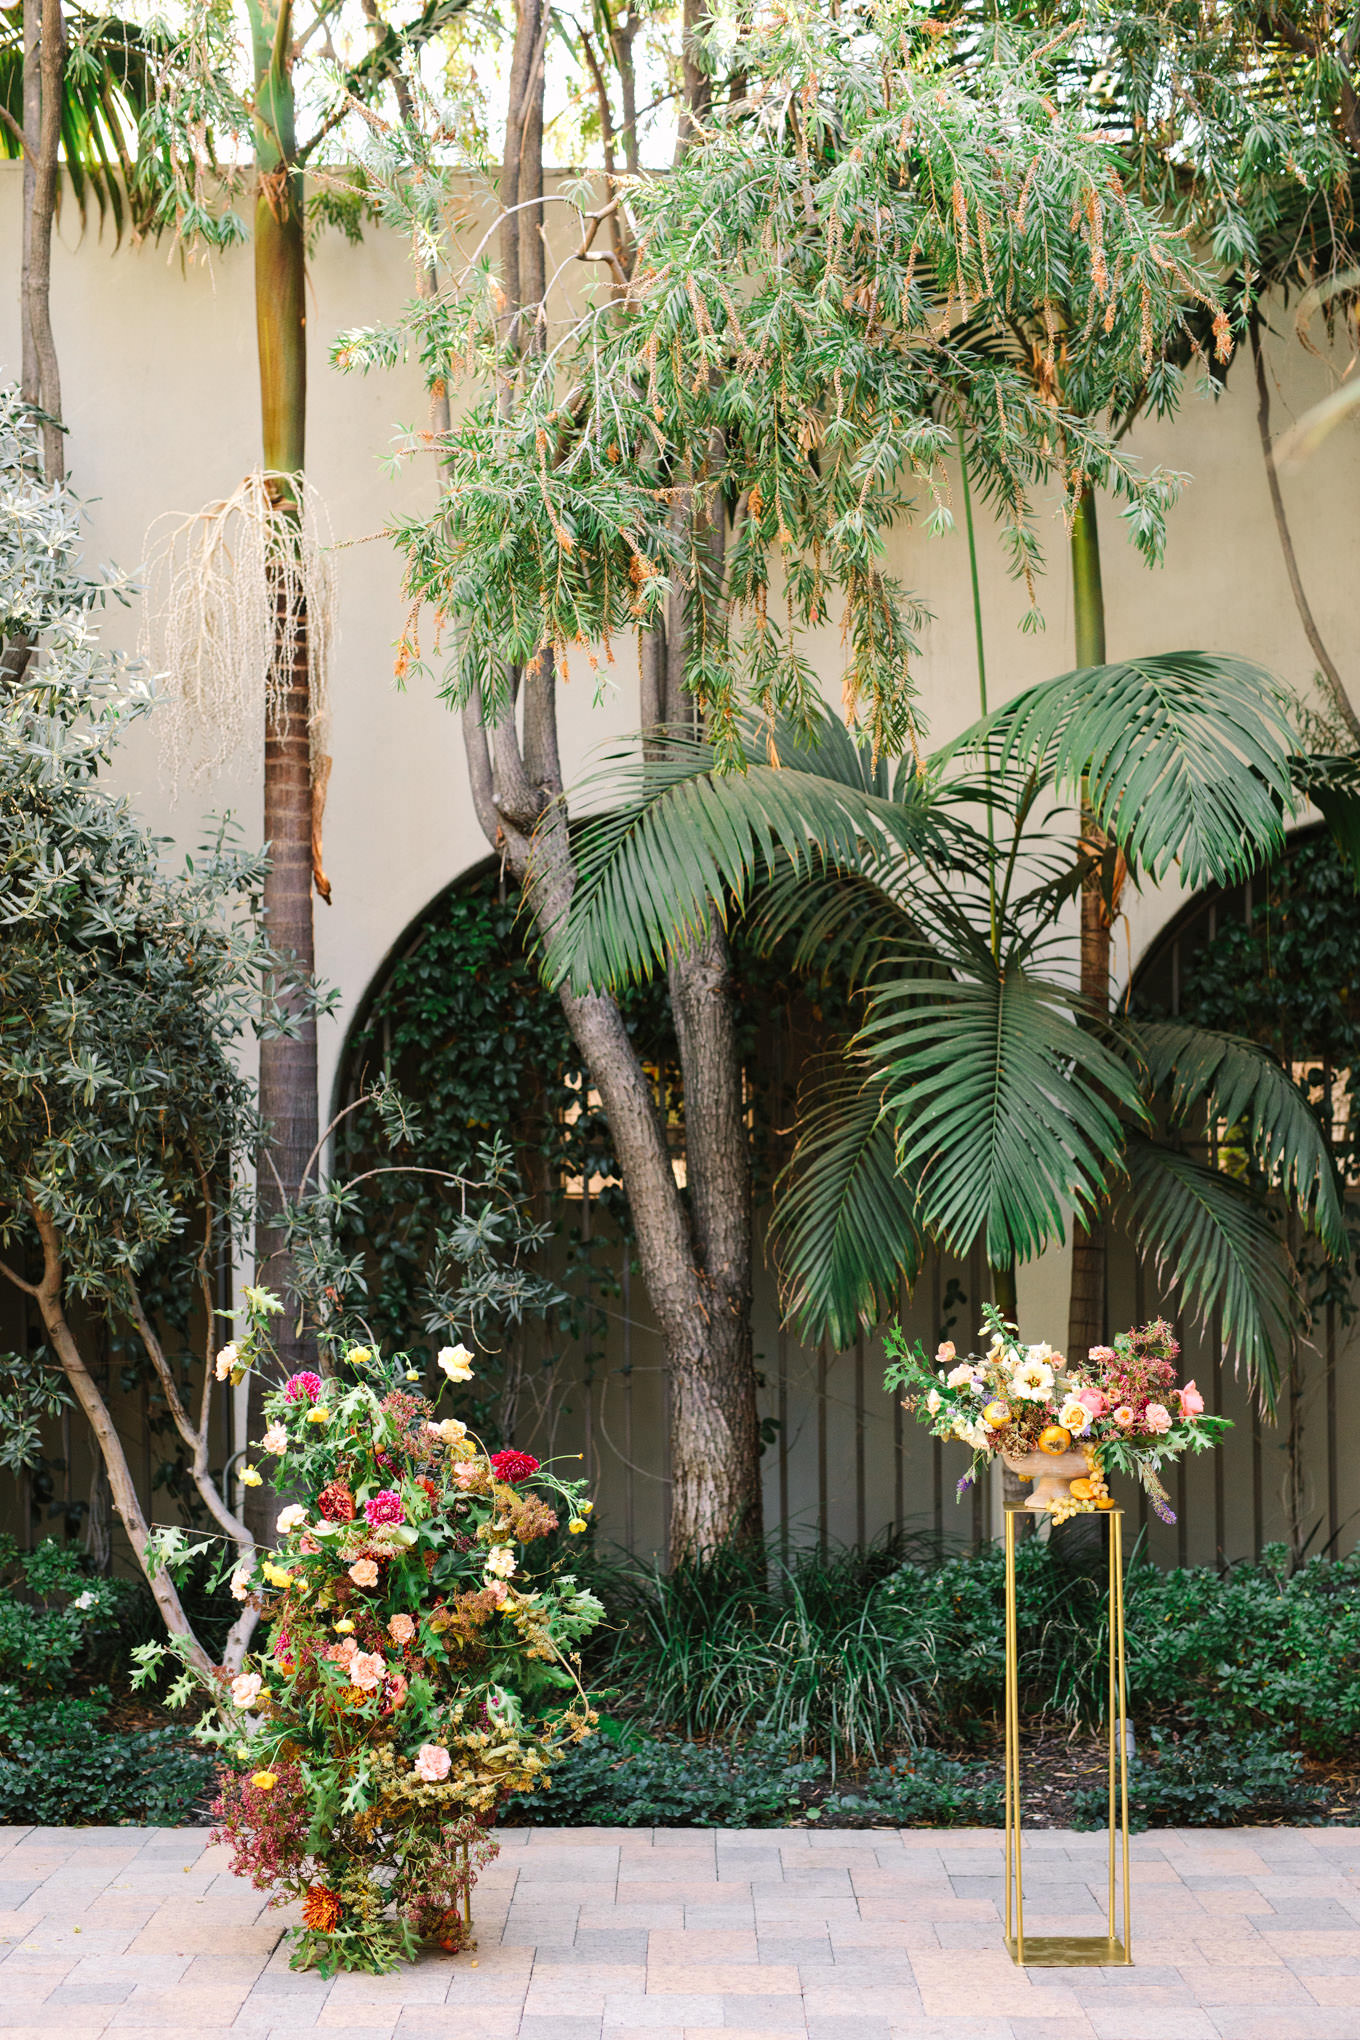 Ceremony decor at Vibiana courtyard | Engagement, elopement, and wedding photography roundup of Mary Costa’s favorite images from 2020 | Colorful and elevated photography for fun-loving couples in Southern California | #2020wedding #elopement #weddingphoto #weddingphotography #microwedding   Source: Mary Costa Photography | Los Angeles